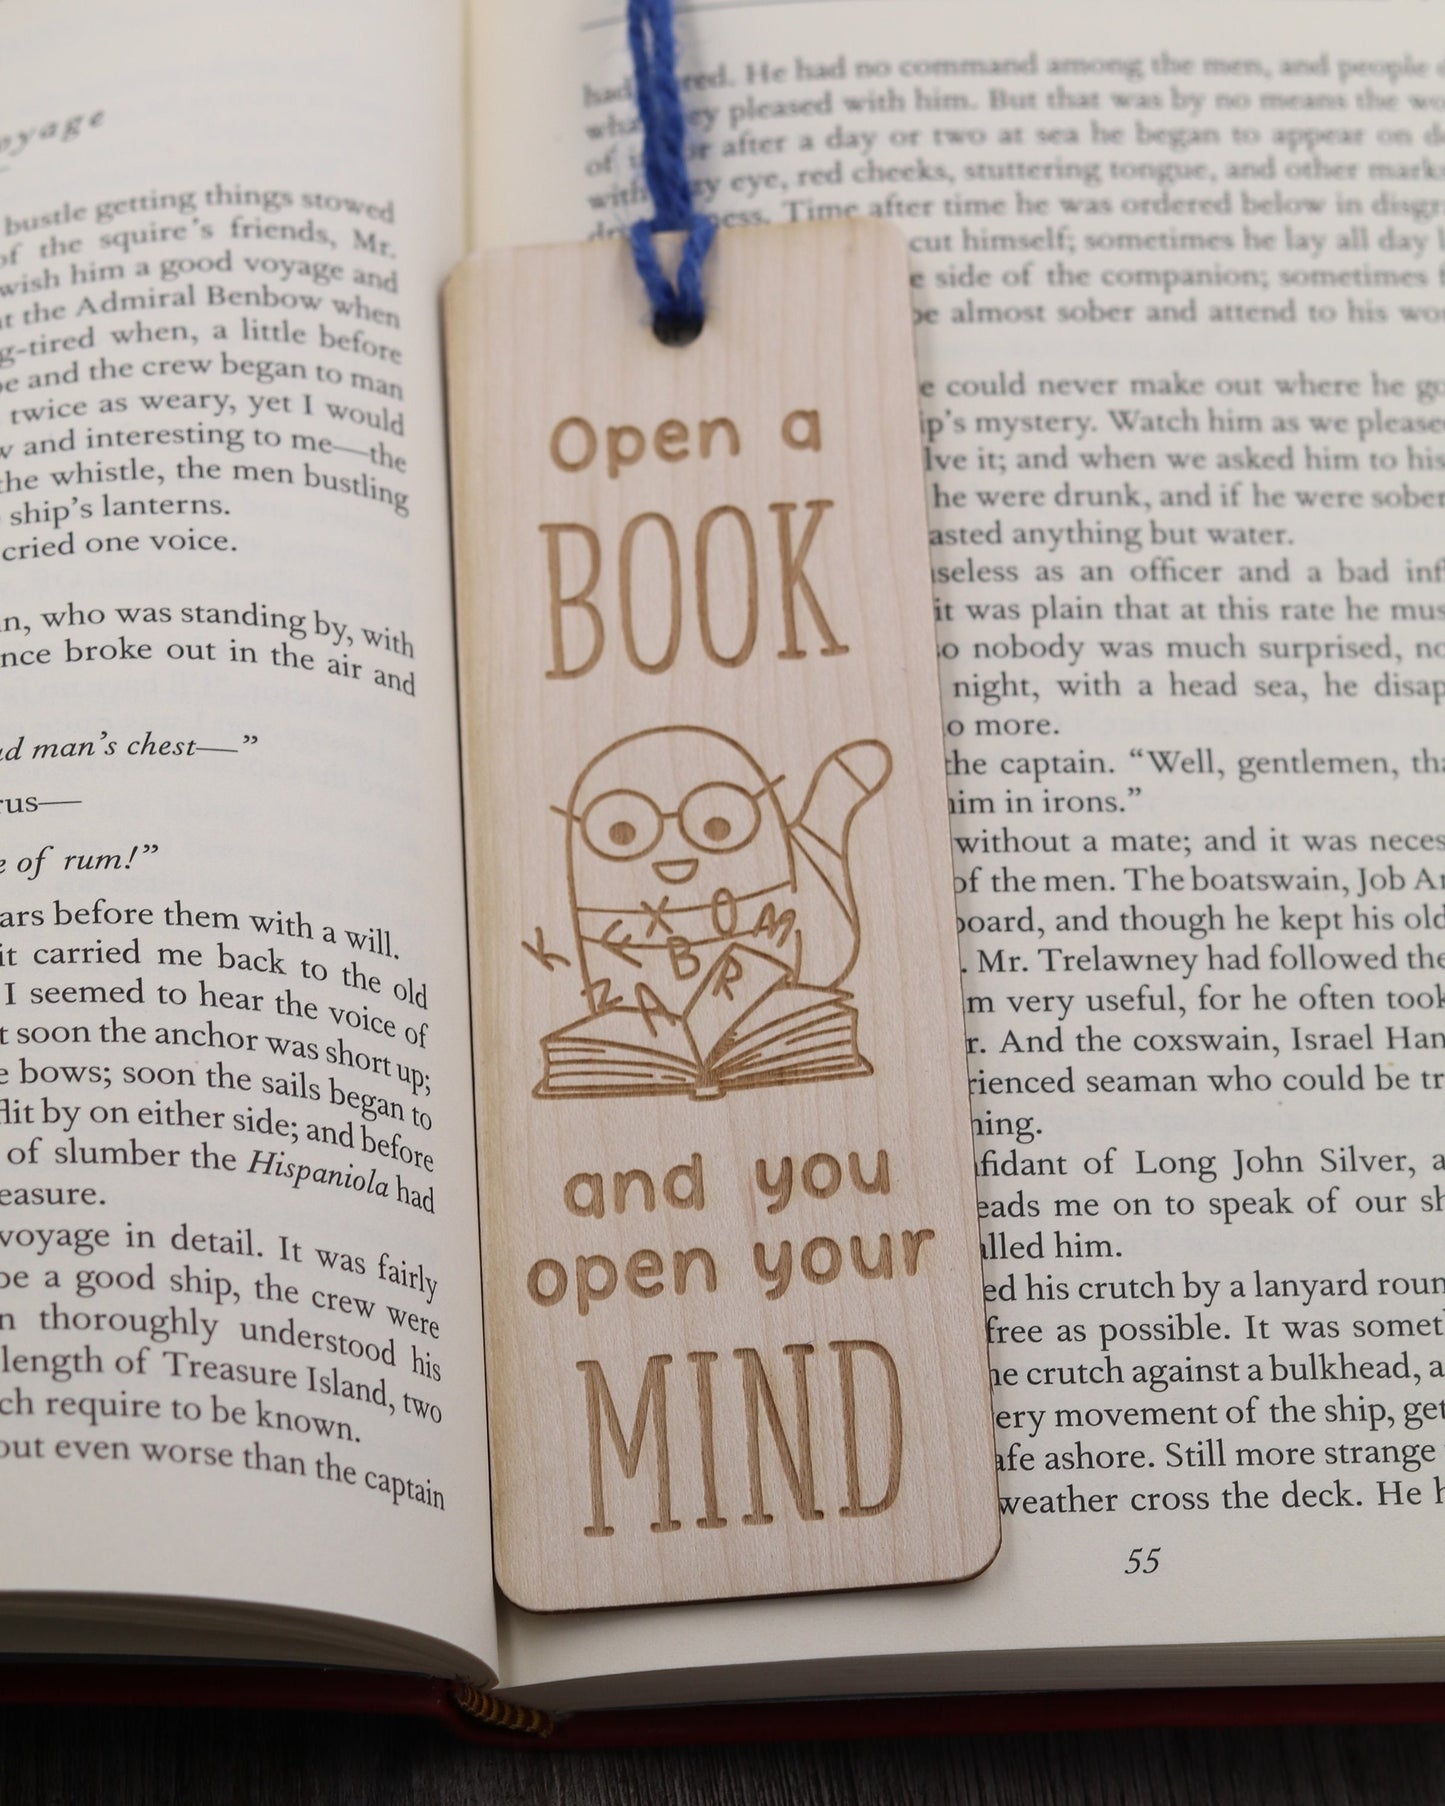 Open A Book and You Open Your Mind - Wood Bookmark